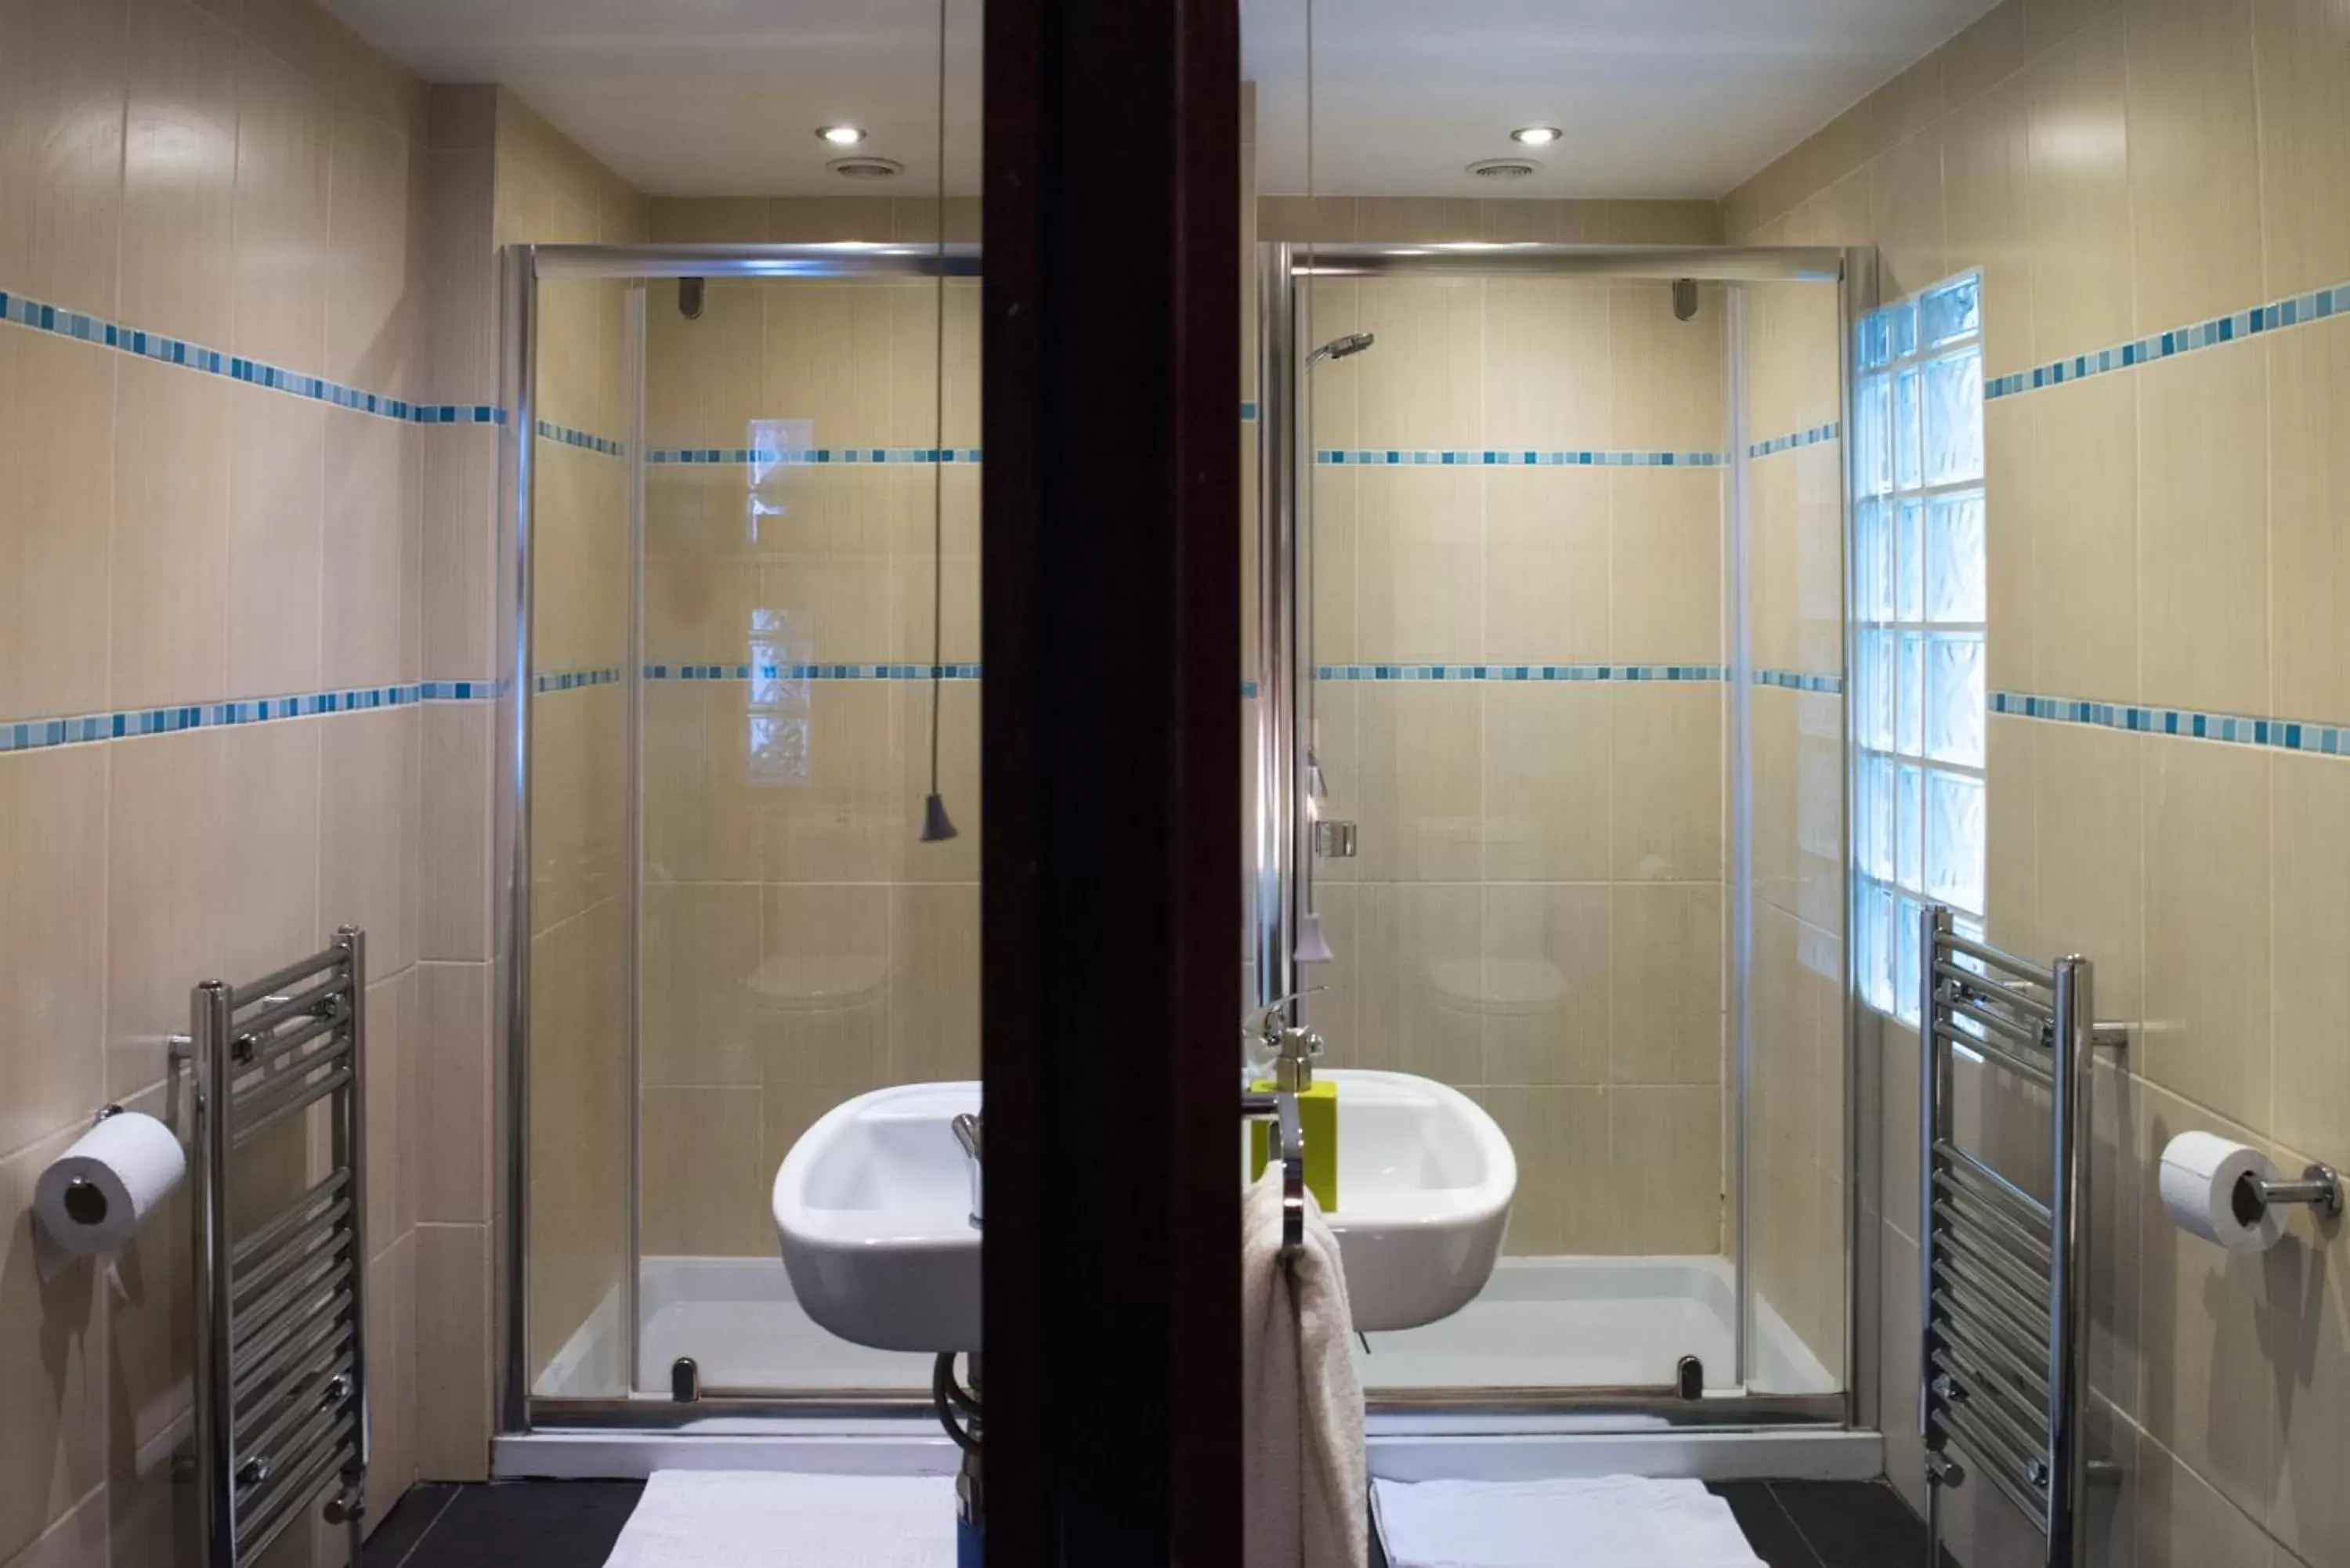 Area and facilities, Bathroom in St Athans Hotel